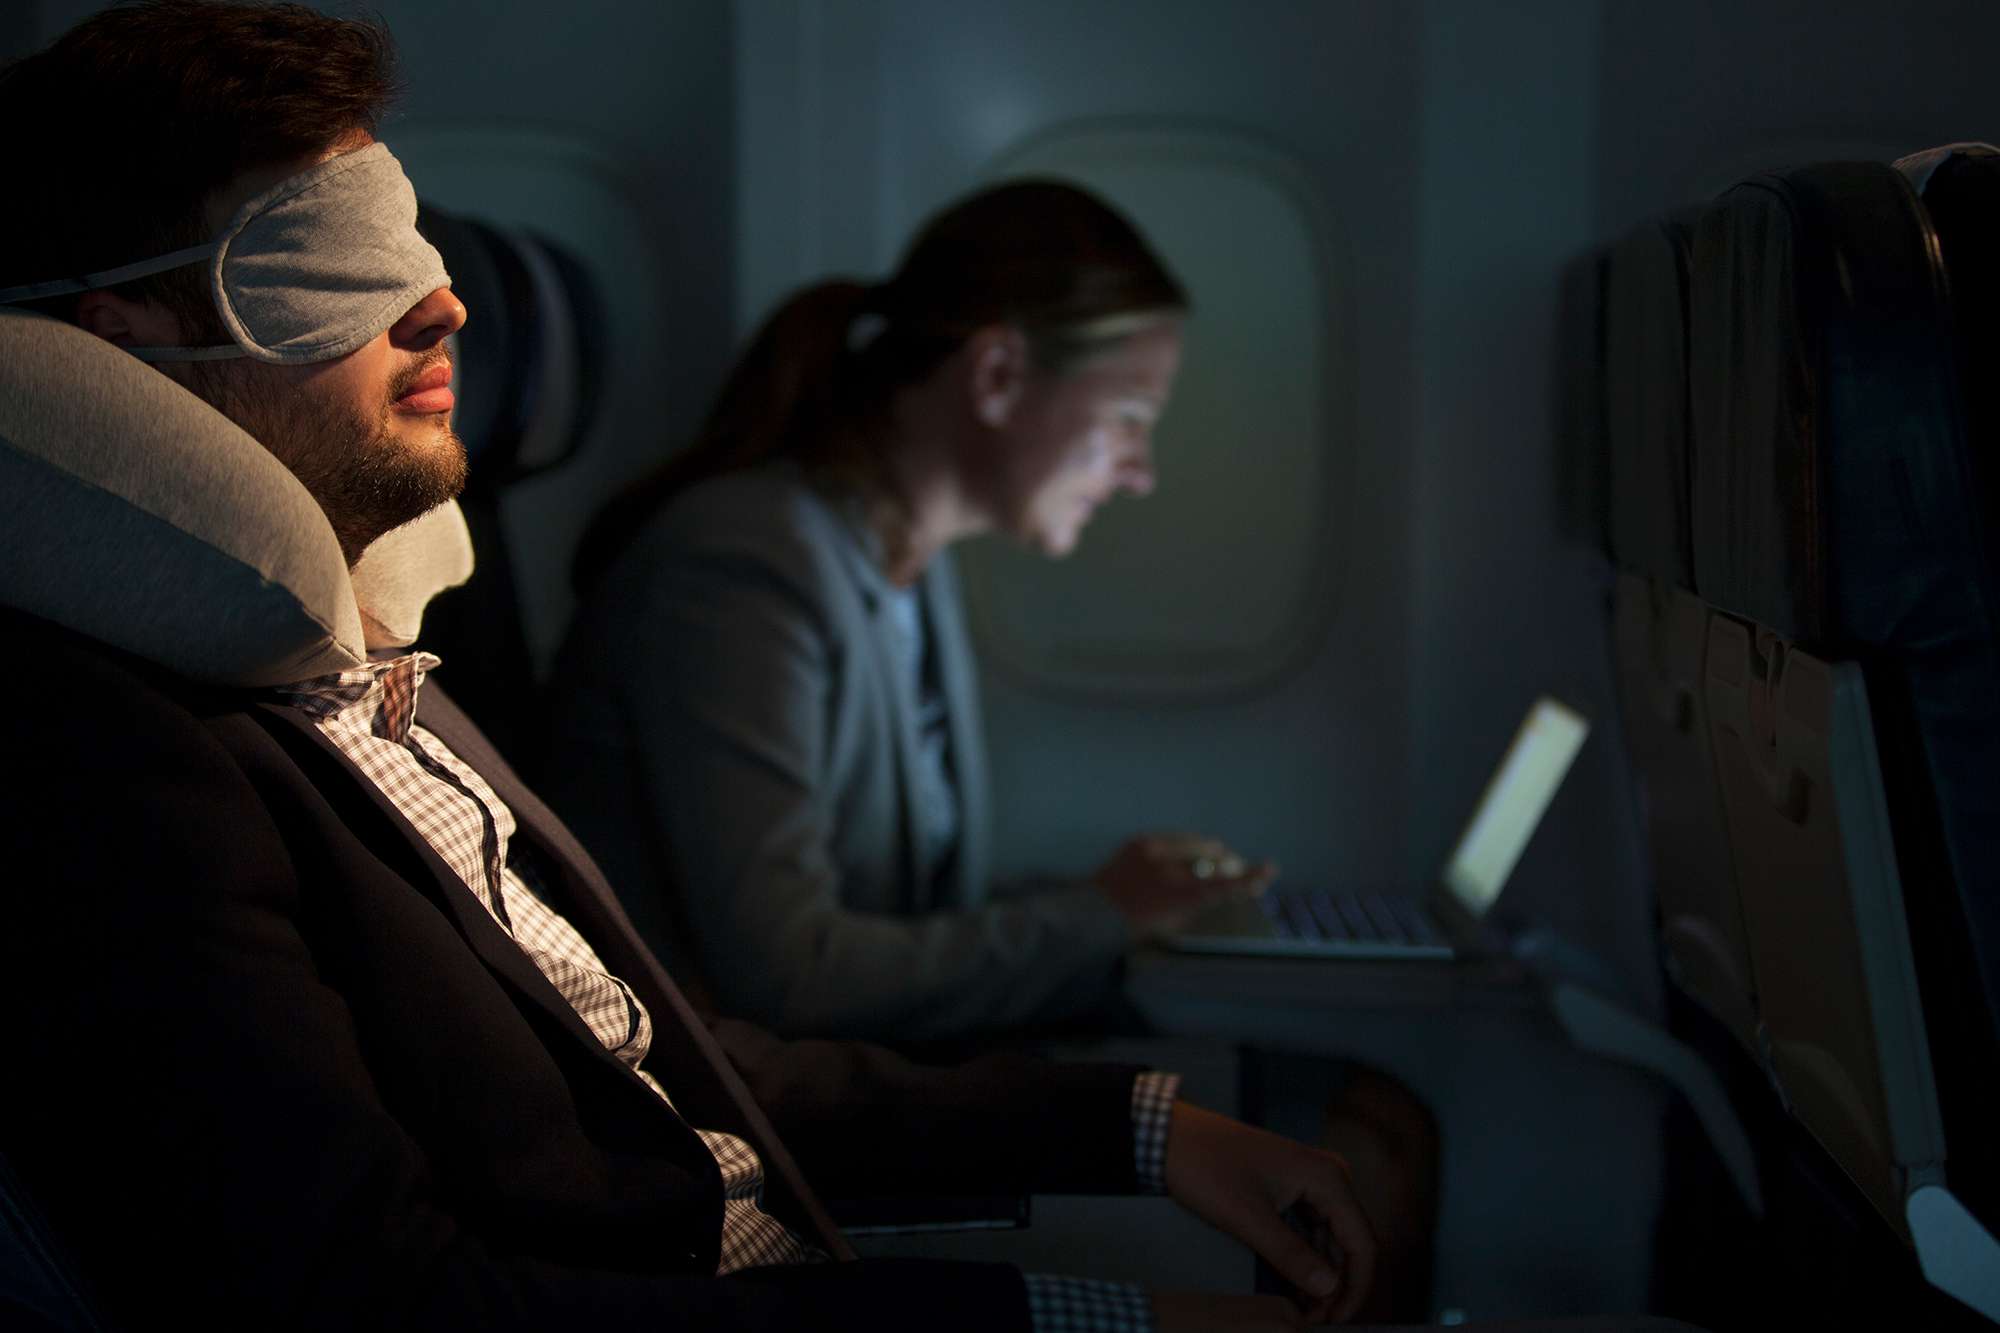 This Psychologist's Hack for Falling Asleep Quickly on Planes Is so Simple